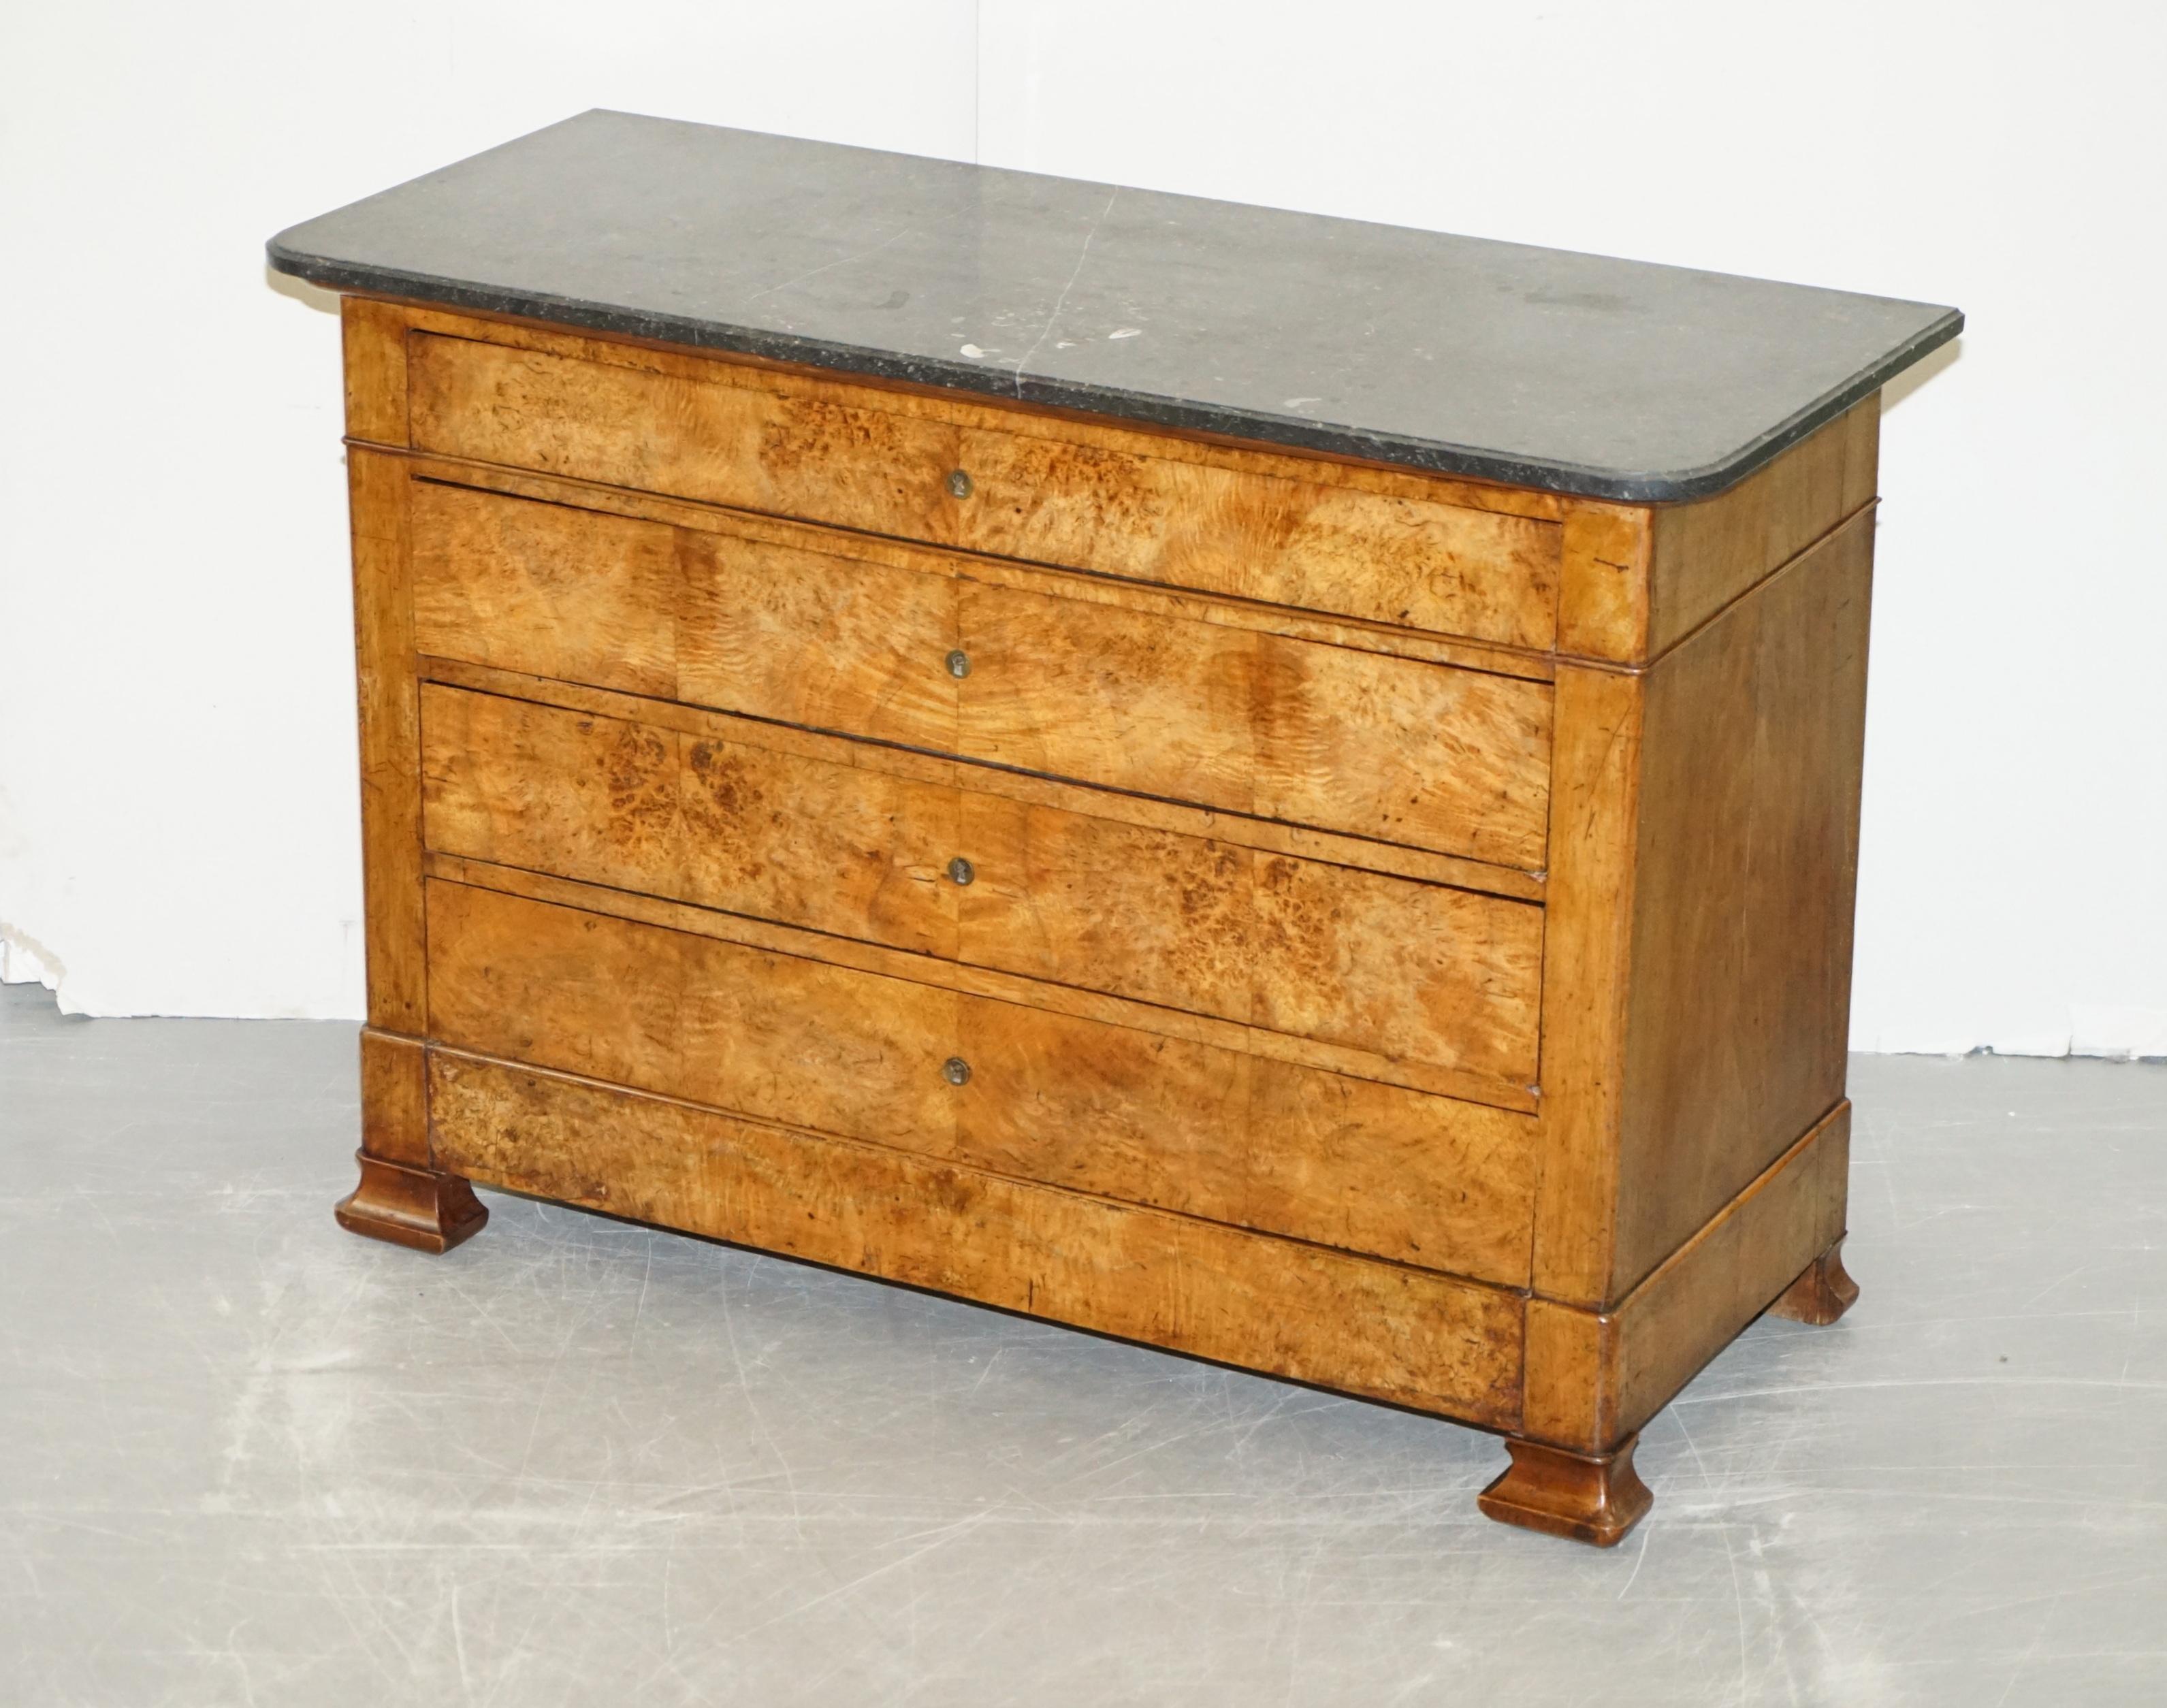 High Victorian Louis Philippe Burr Walnut & Fossil Marble Commode Chest of Drawers, circa 1860